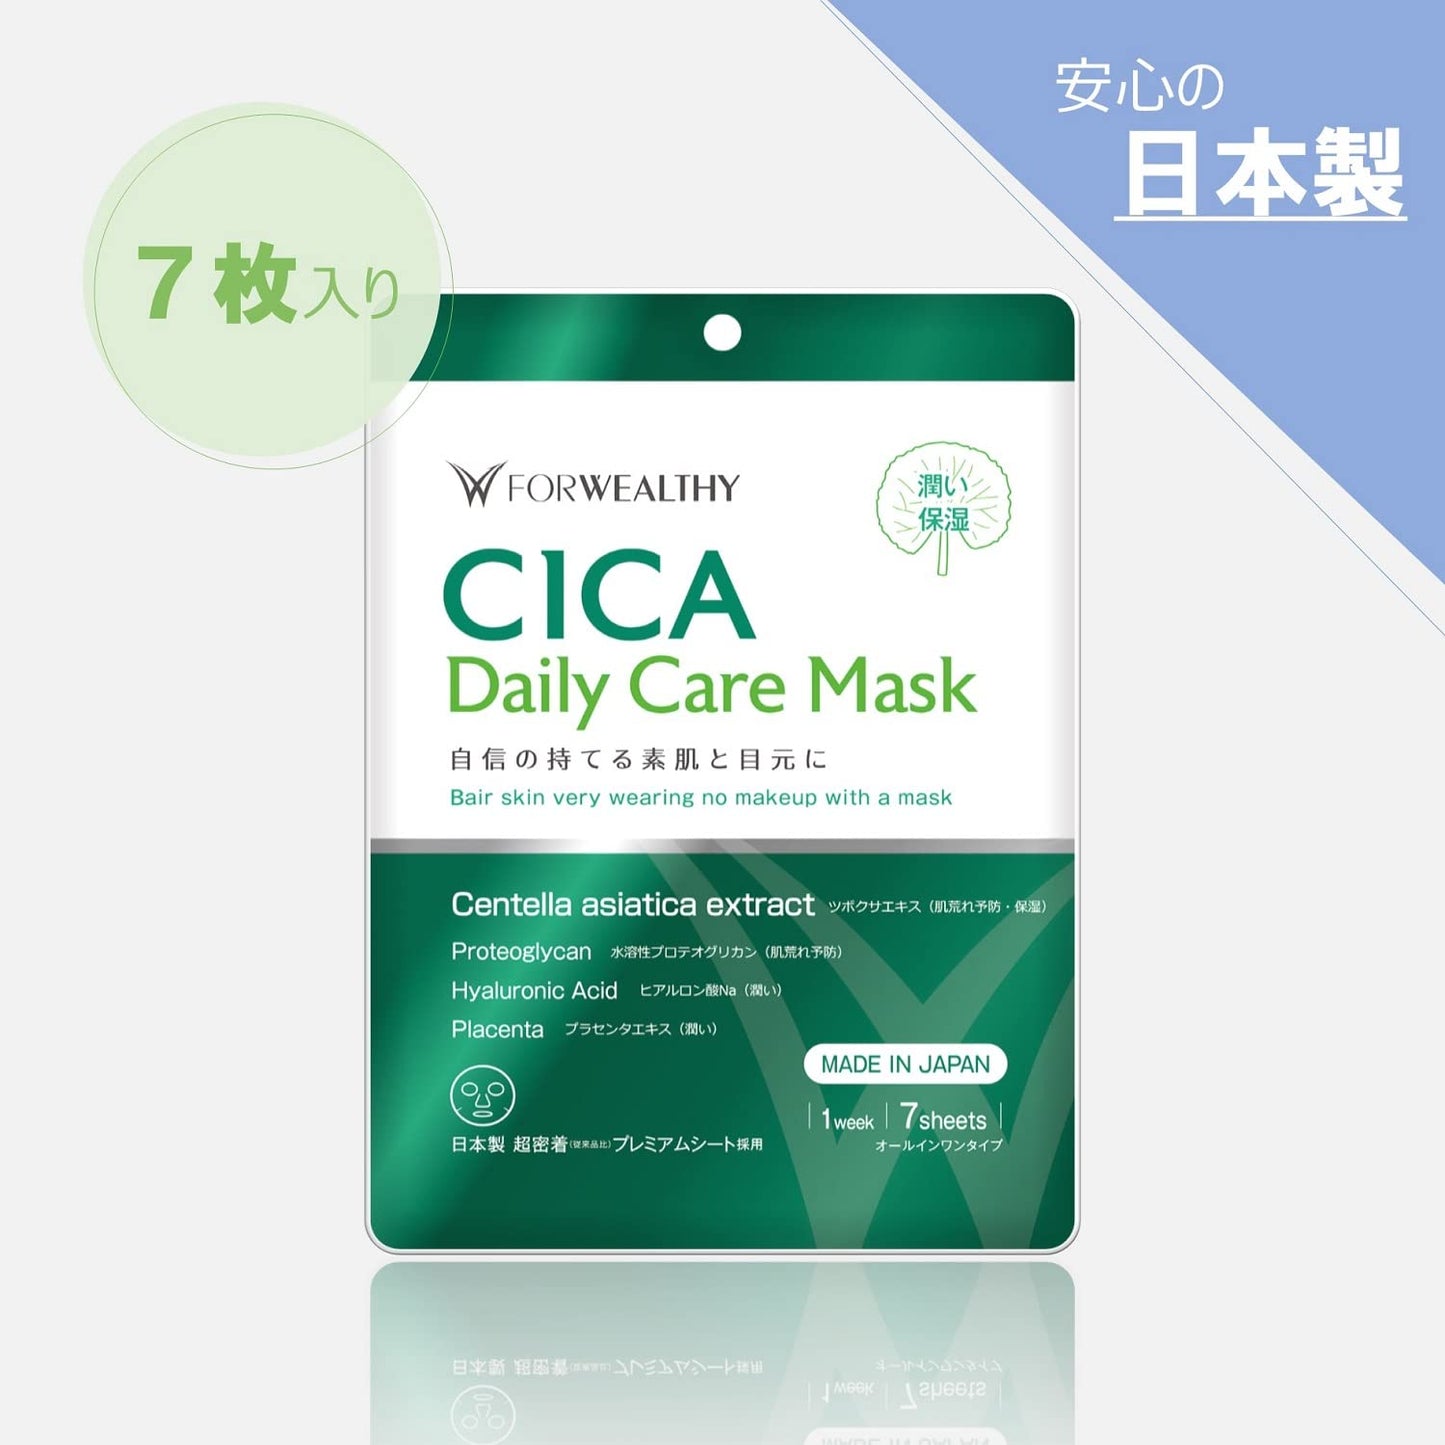 FOR WEALTHY CICA Daily Care Mask - 7 pcs